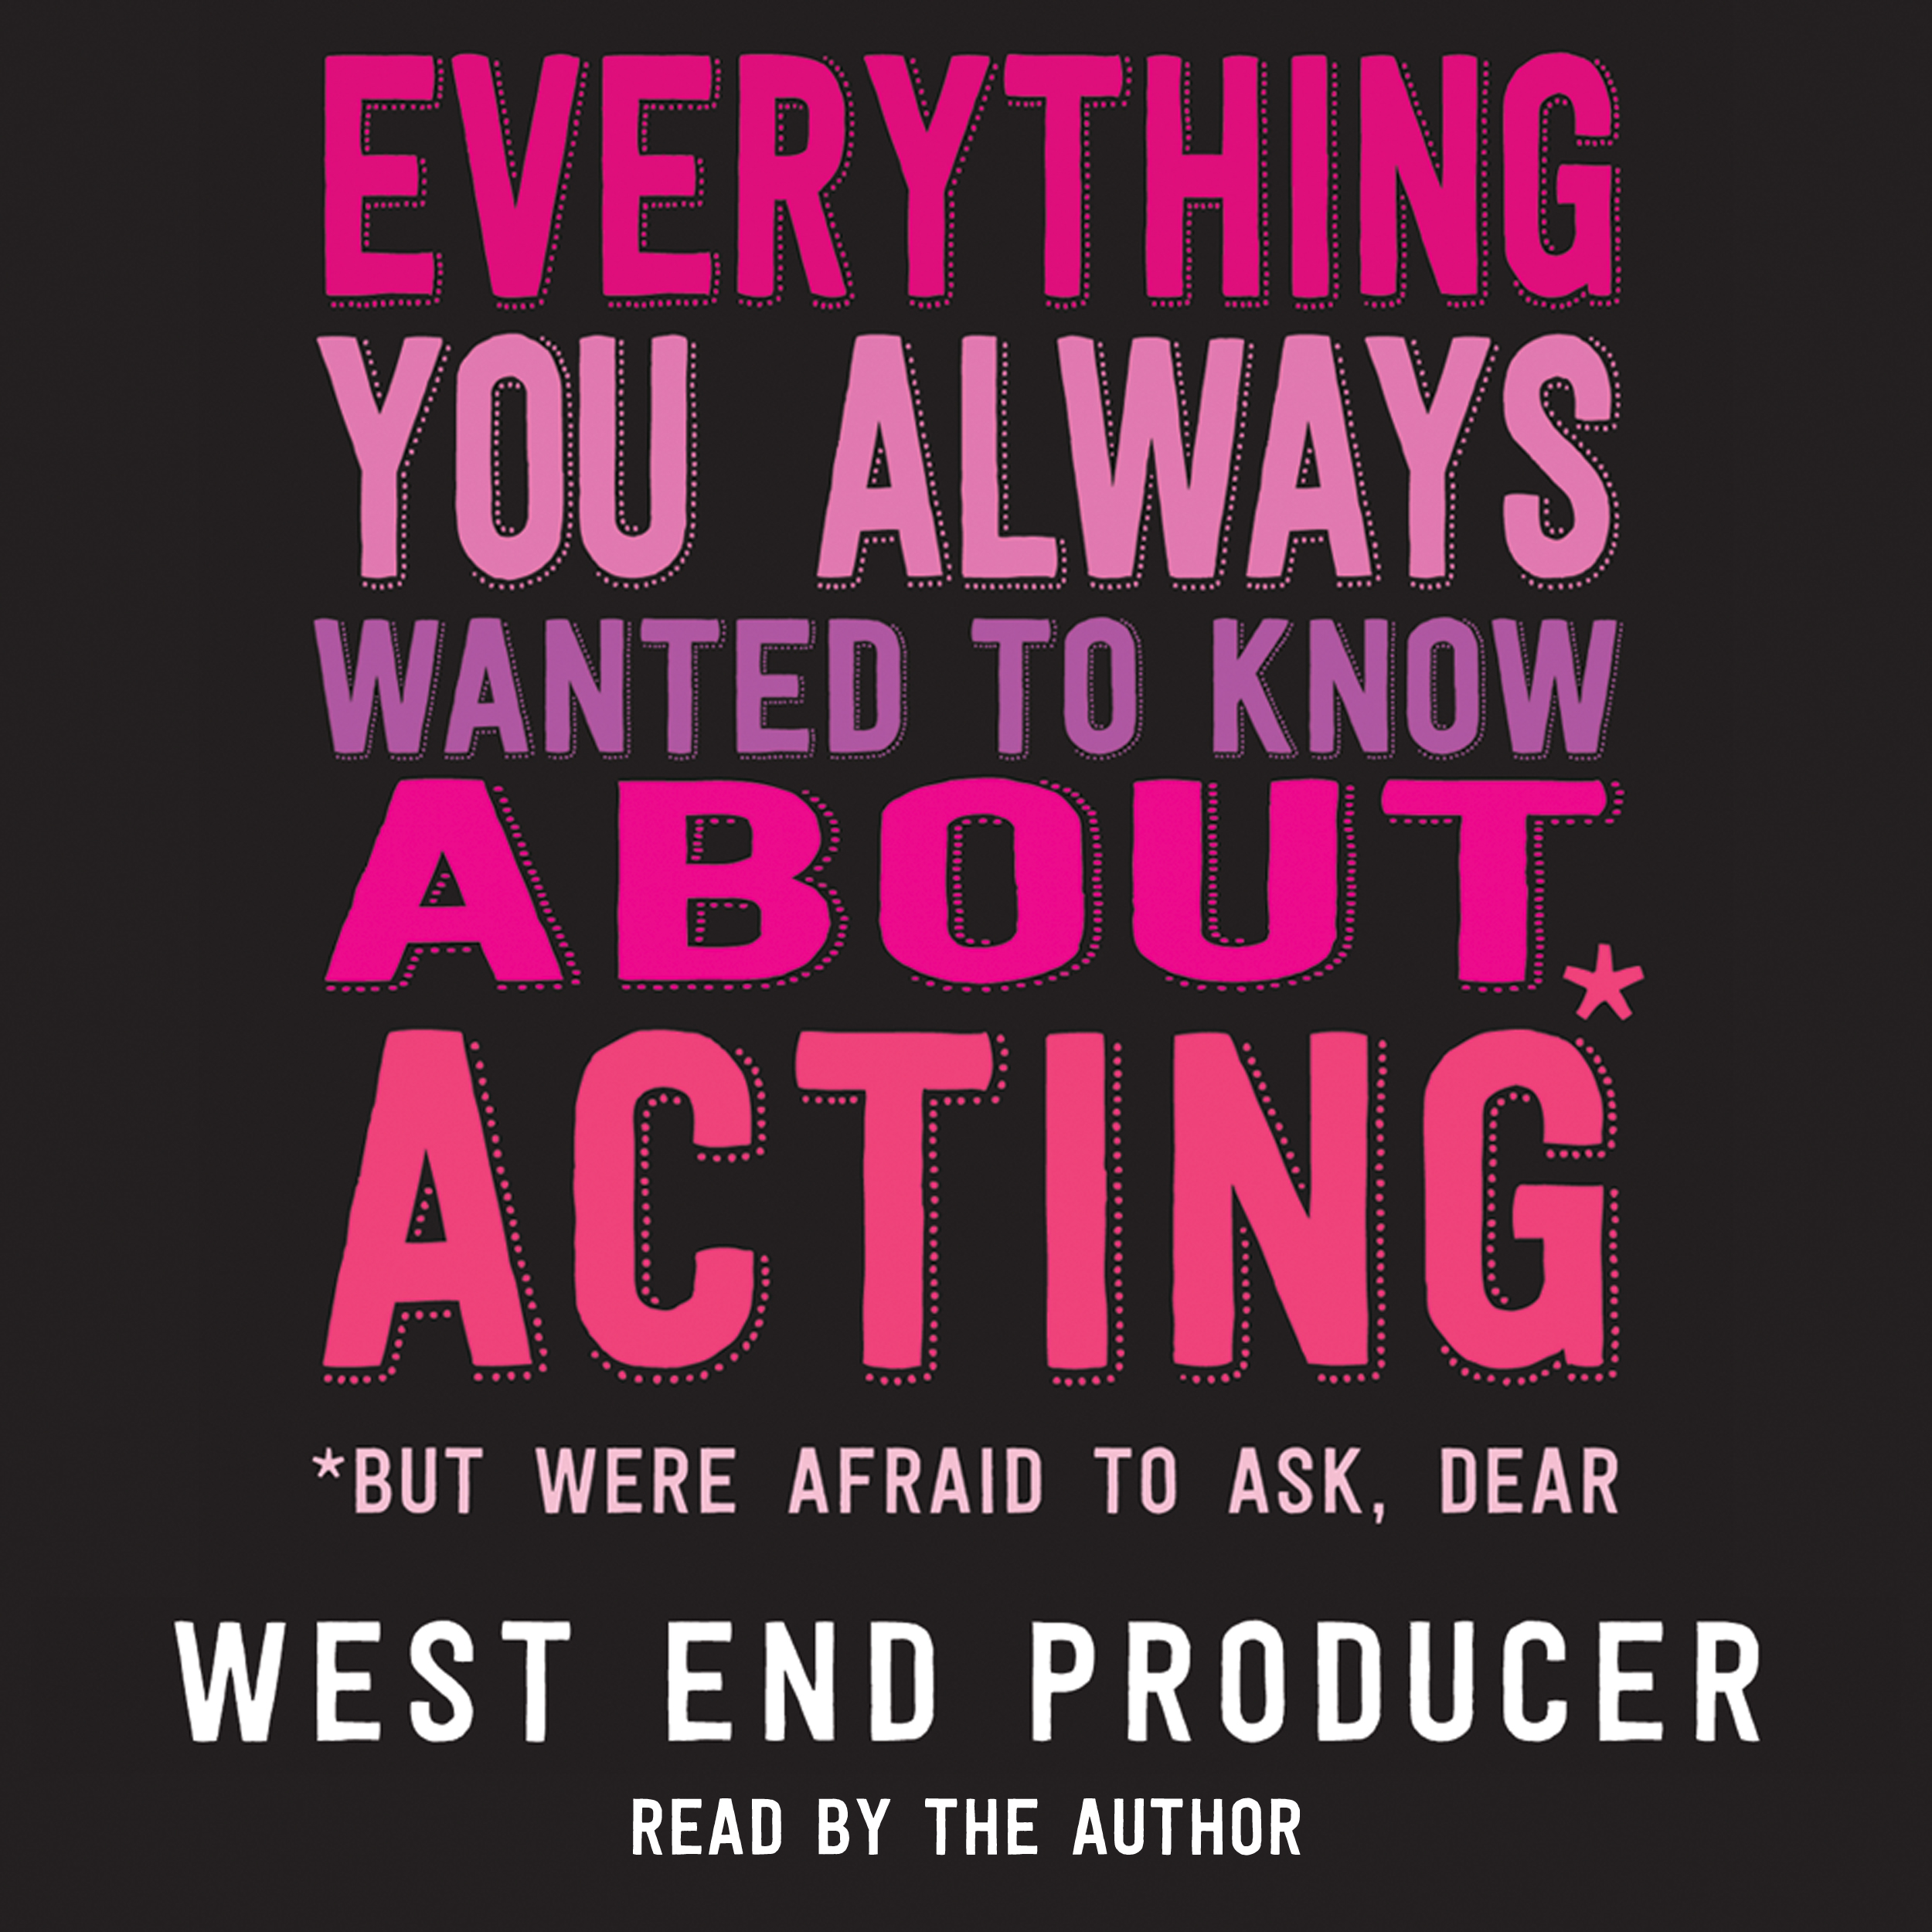 West End Producer audiobook out now